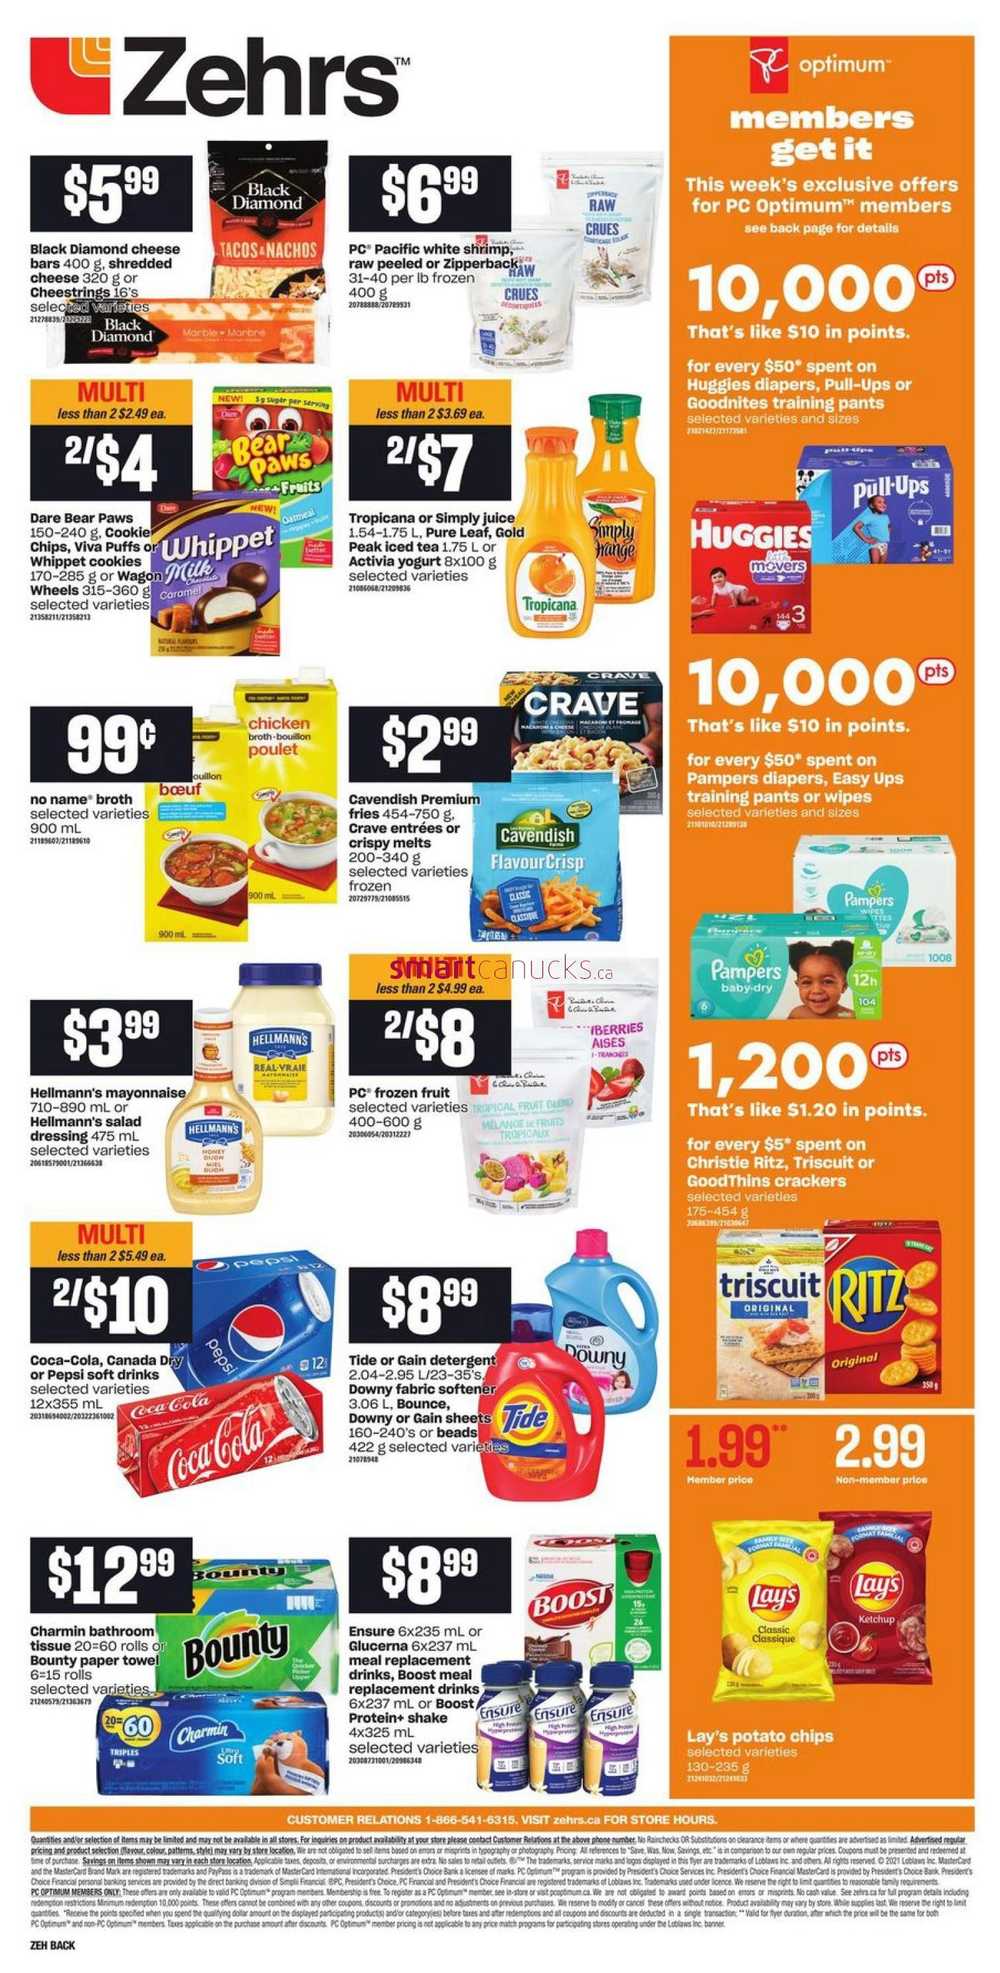 Zehrs Flyer May 20 to 26